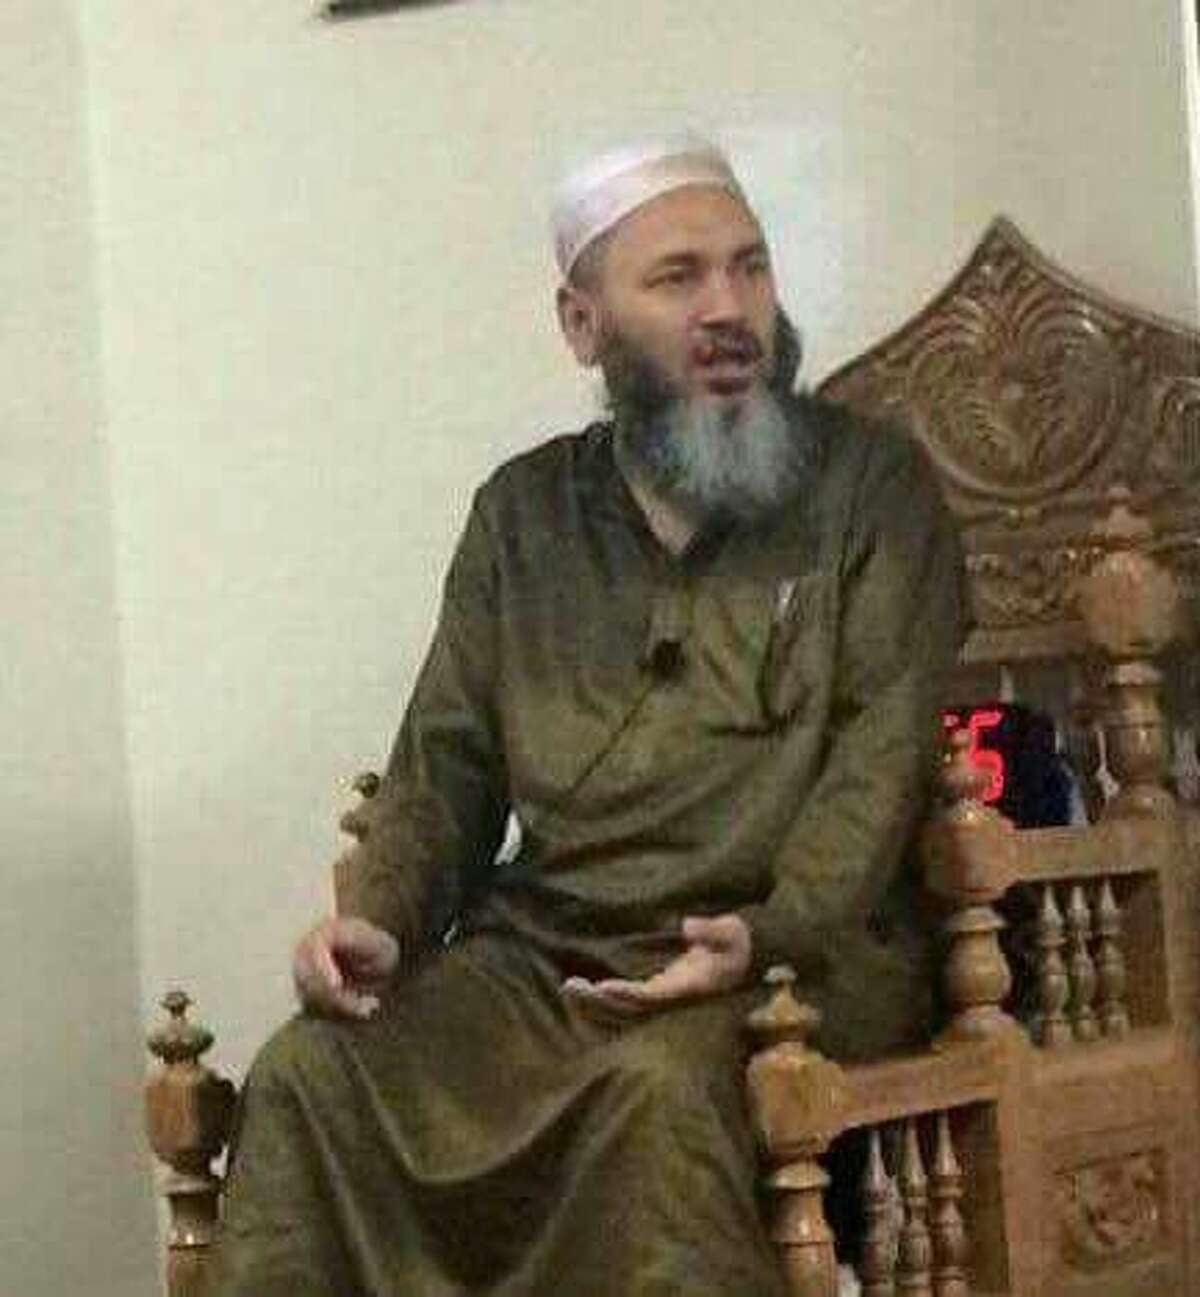 Imam Maulama Akonjee and another man died in a fatal shooting Saturday as they left the Al-Furqan Jame Masjid mosque in the Queens borough of New York after prayers. Police say that motive has yet to be determined.